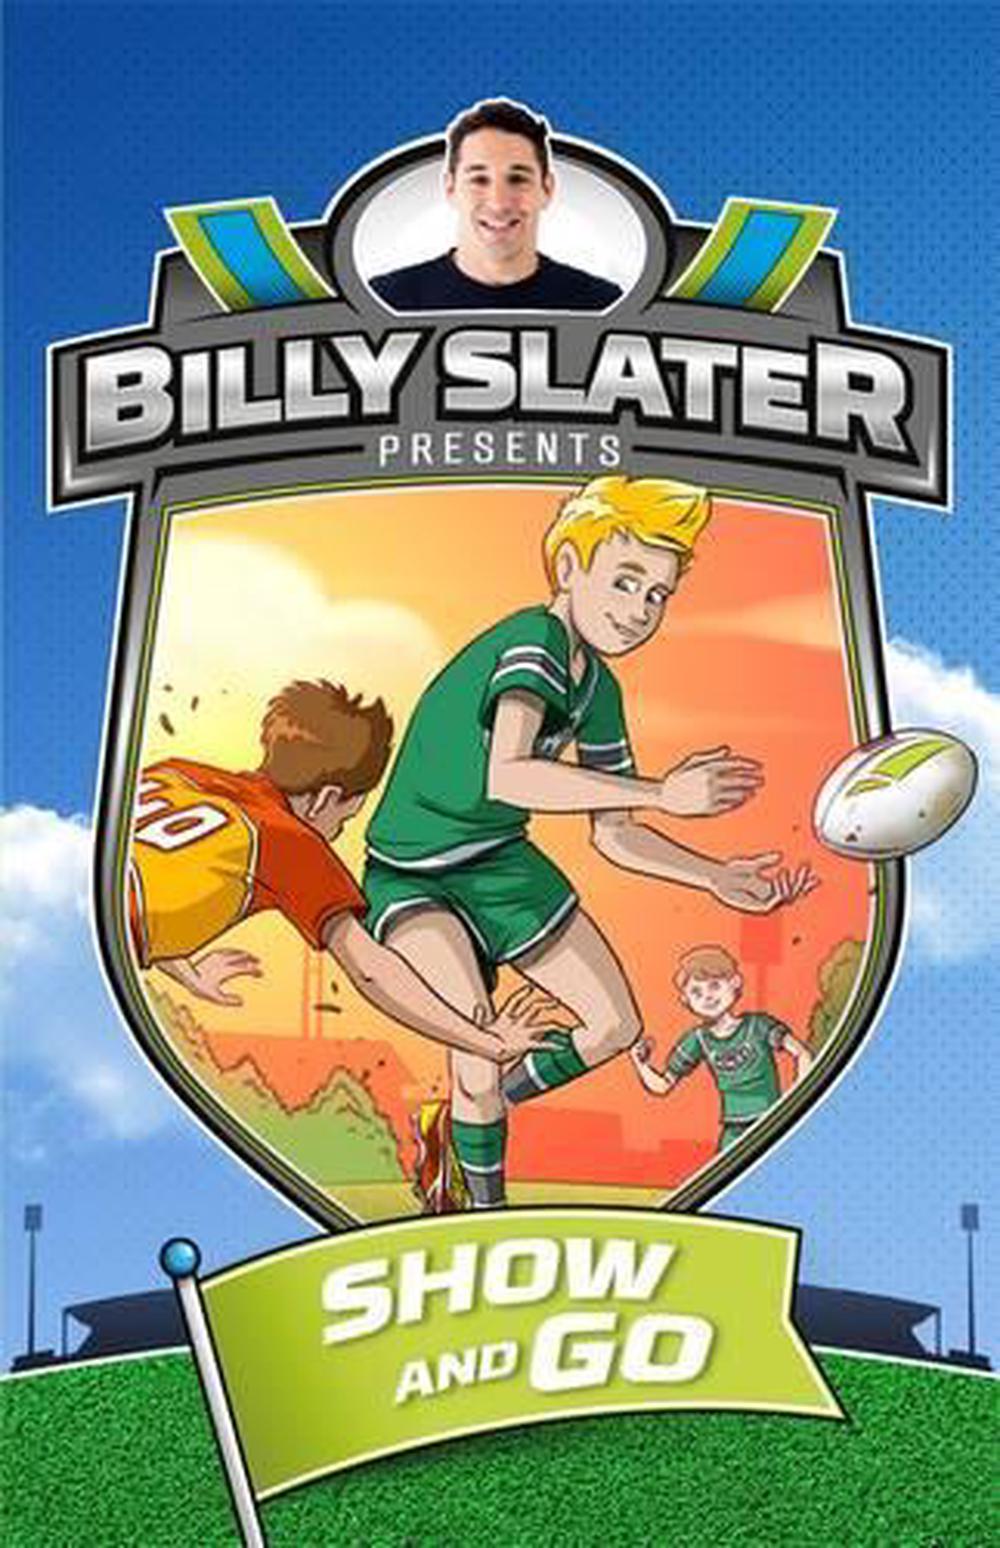 Billy Slater show and go